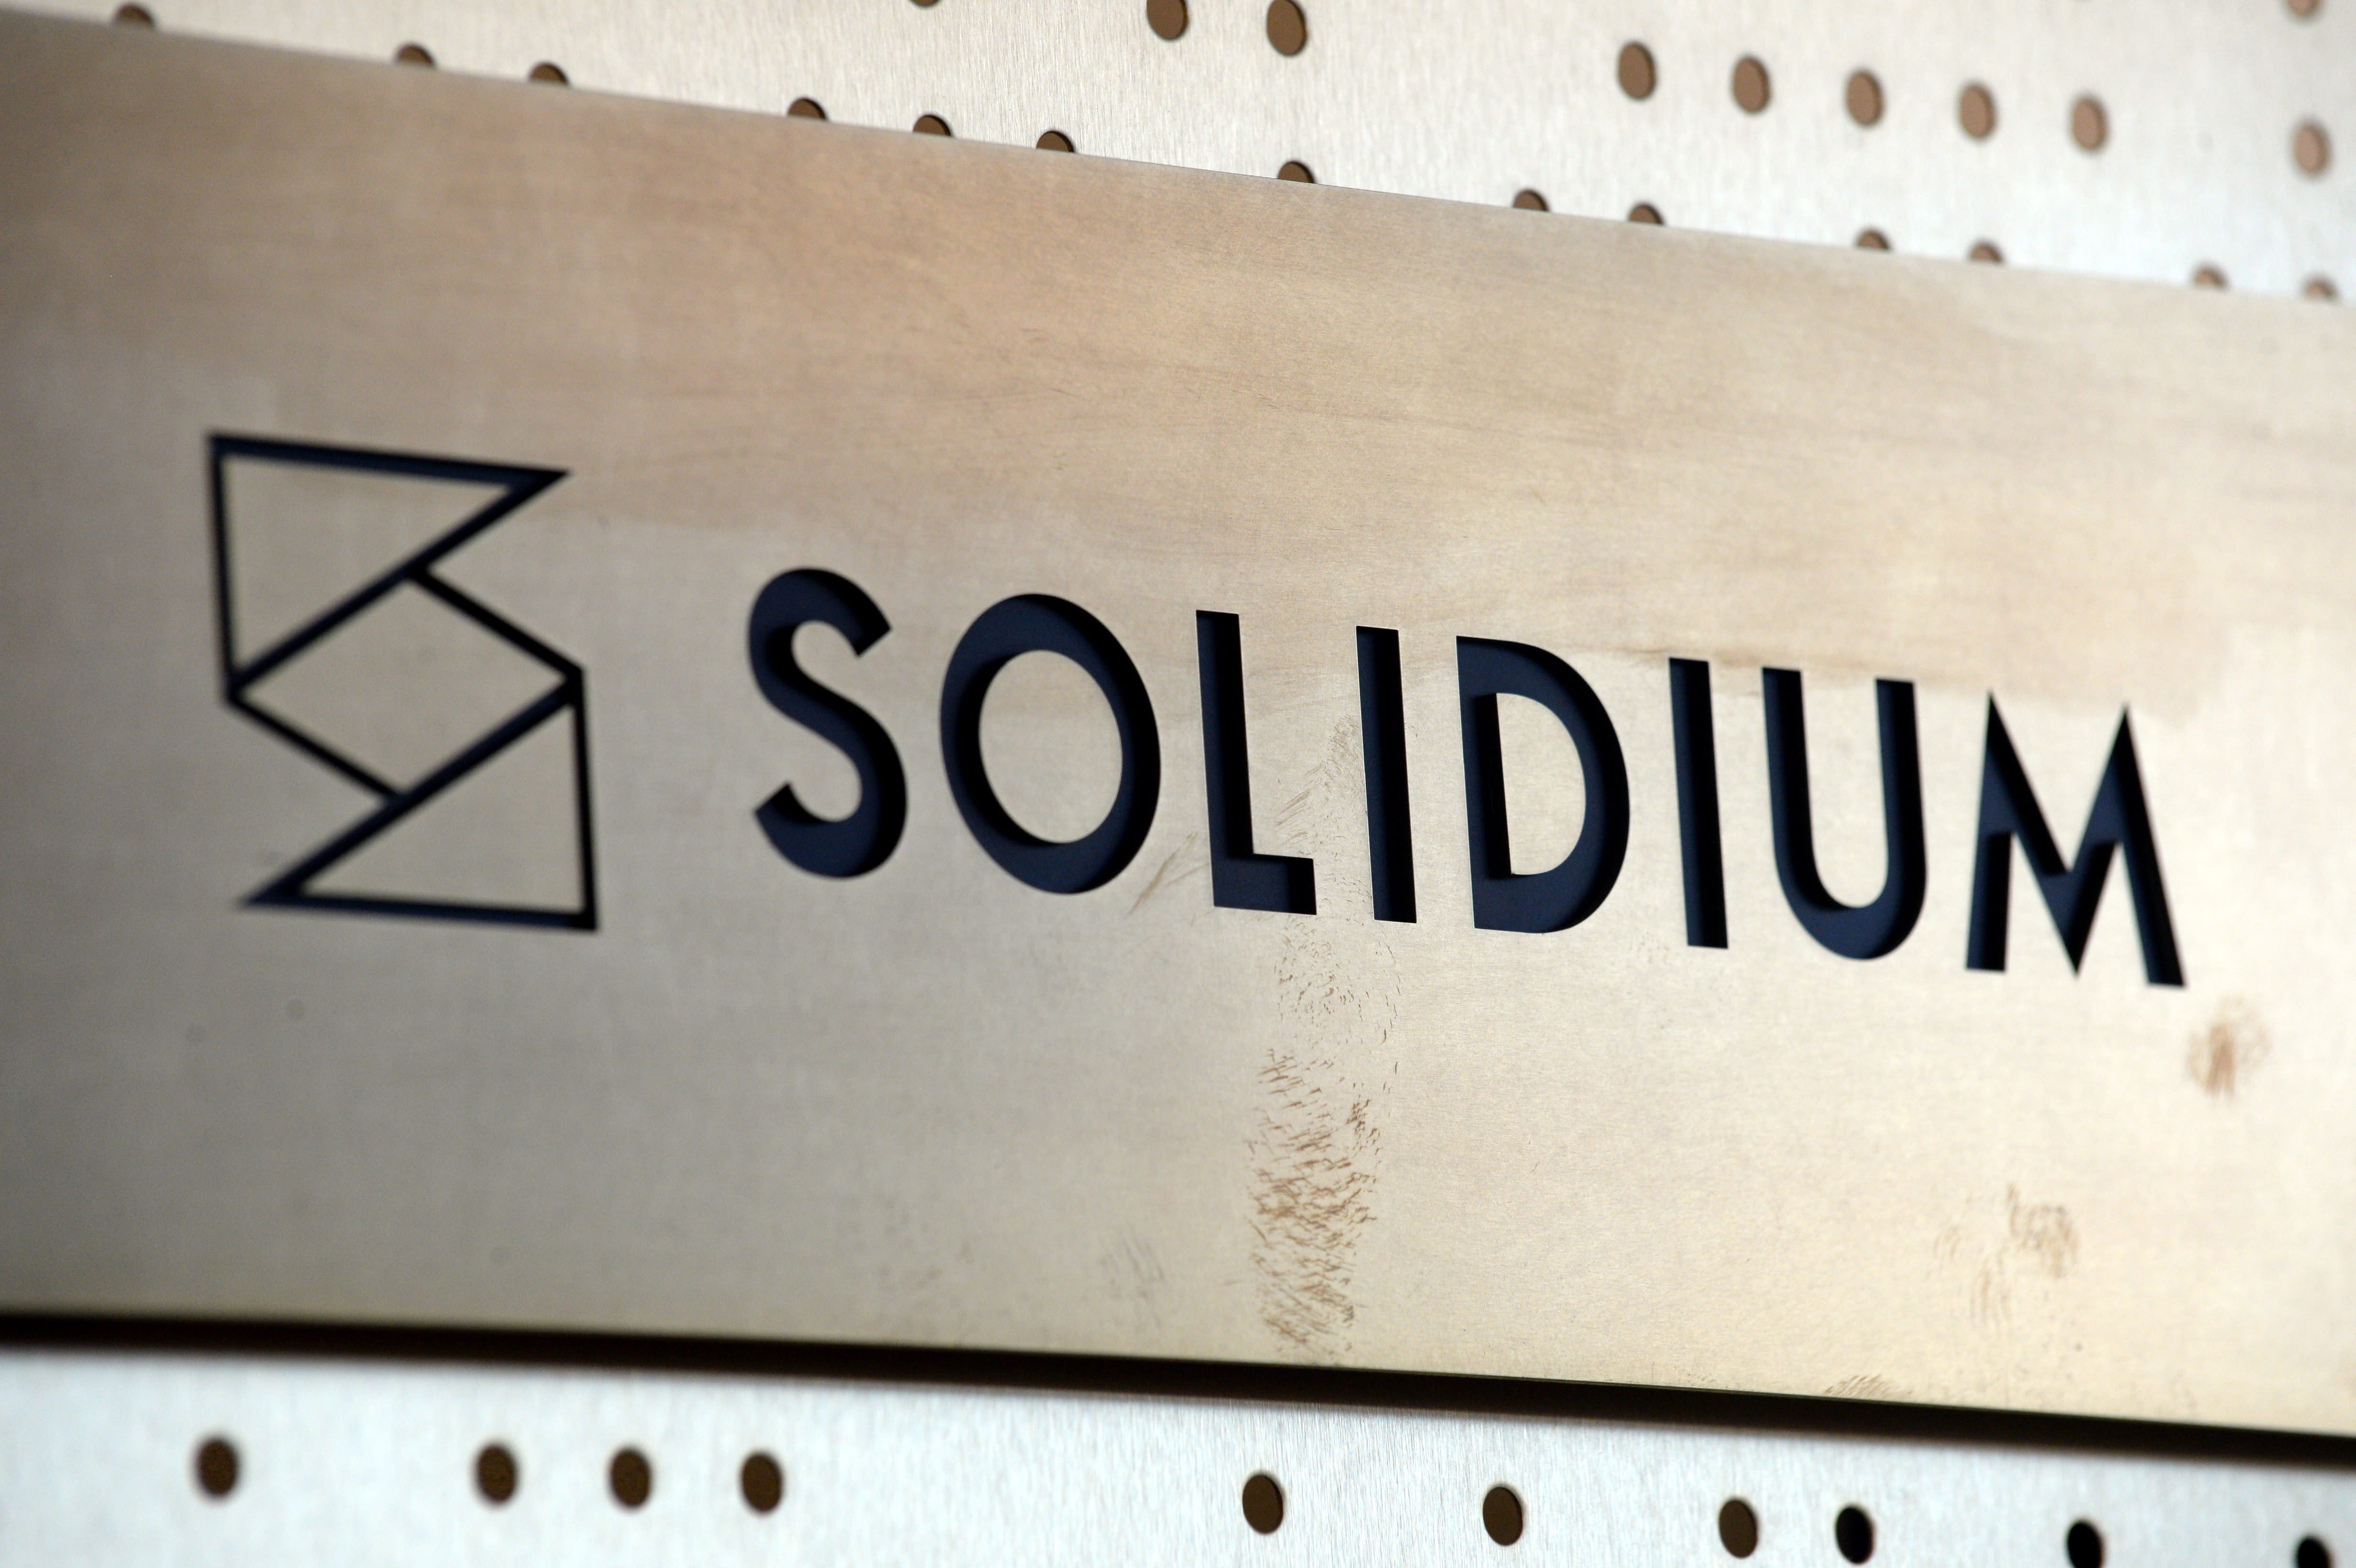 The state-owned investment company Solidium is at the top of the tax list for limited companies